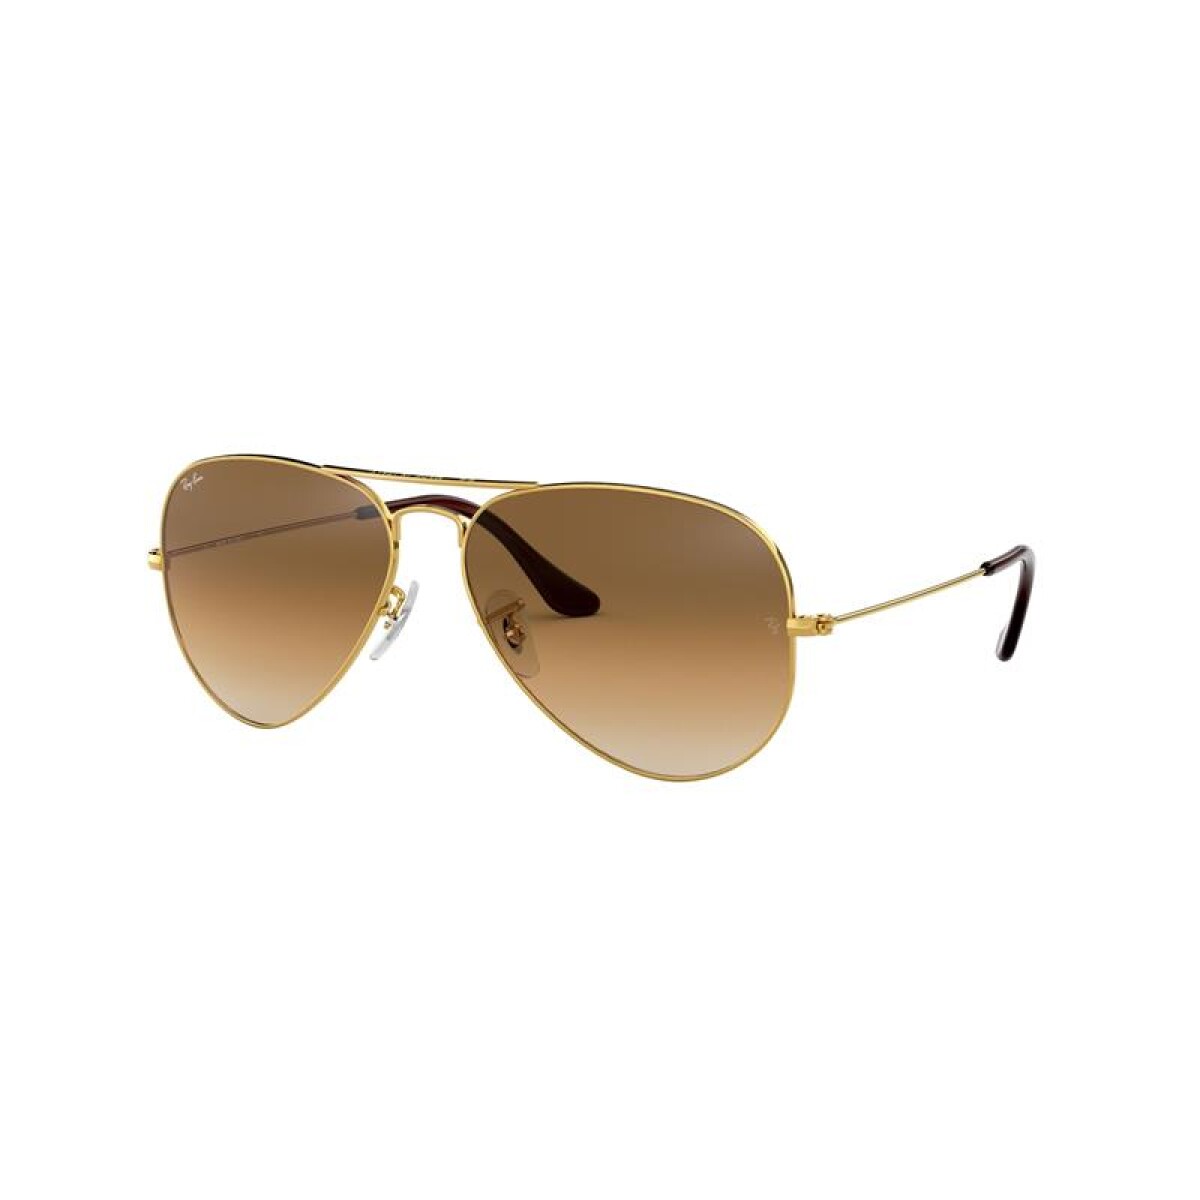 Ray Ban Rb3025l - 001/51 